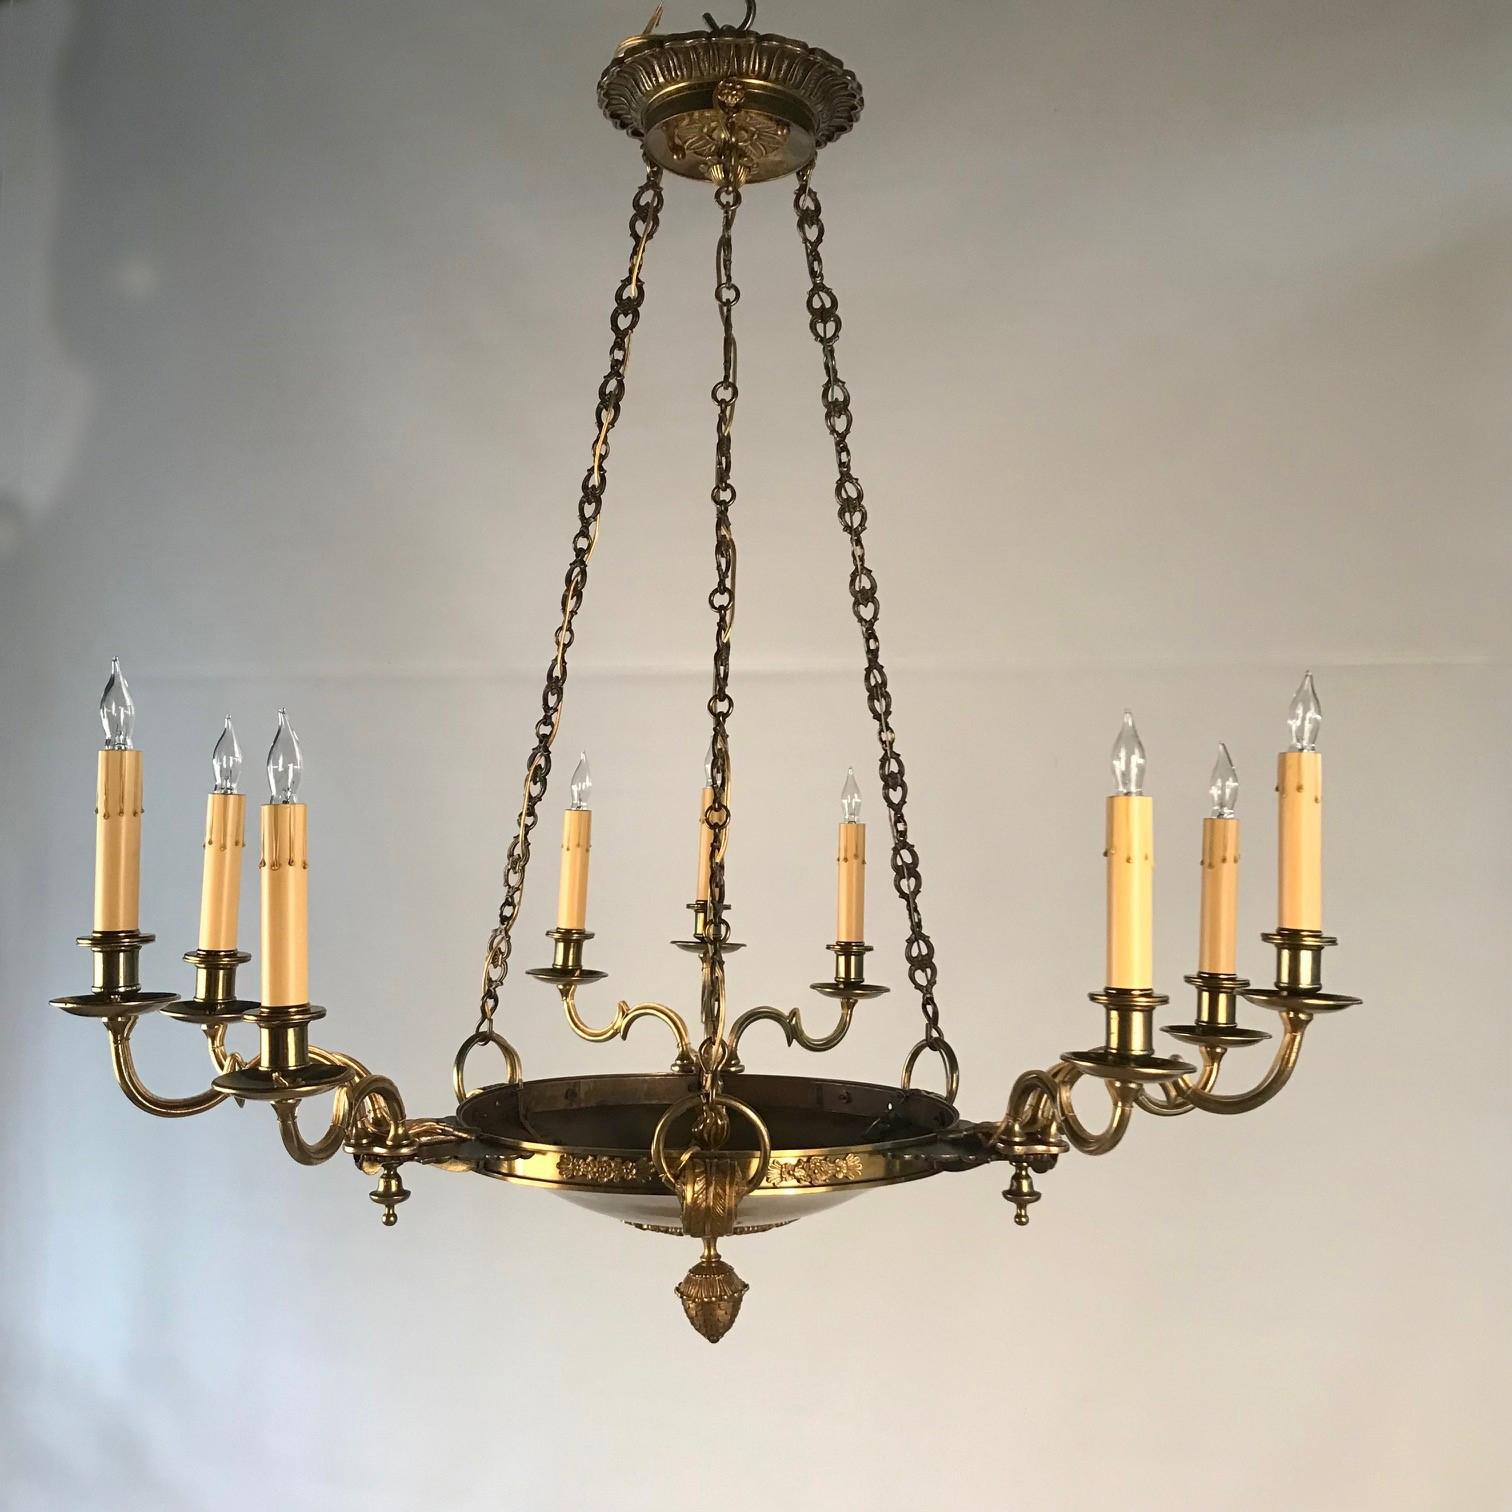 Empire style chandeliers tend to be quite hefty and large, This bronze example is unusually delicate. The dished circular pan is hung from three flat pierced suspension chains, and supports three clusters of three lights with shaped arms, candle